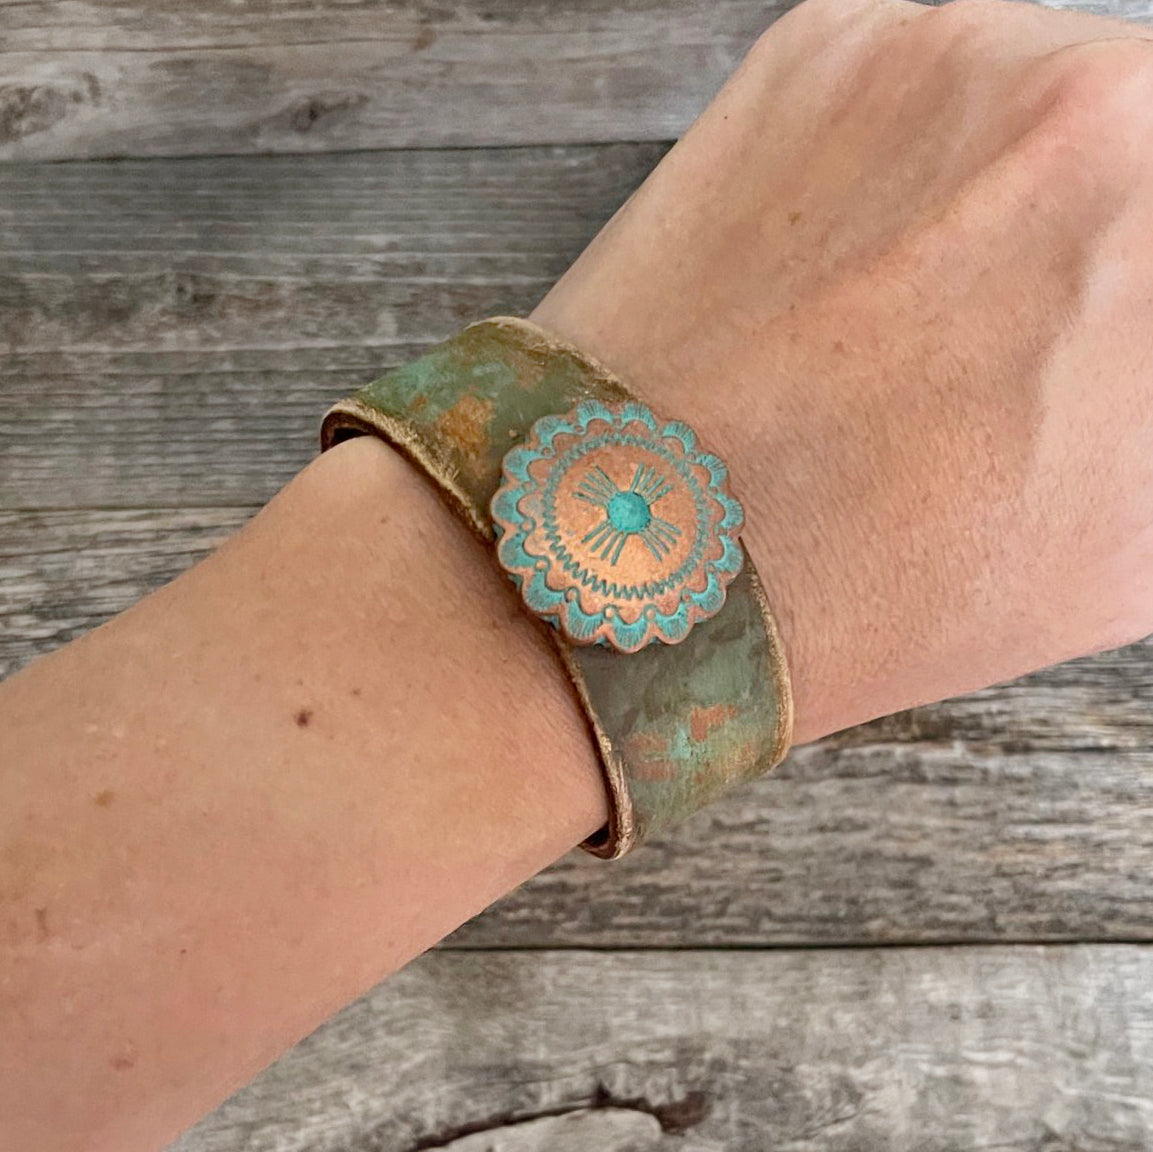 MADE TO ORDER - Genuine Leather Bracelet Turquoise Patina Concho